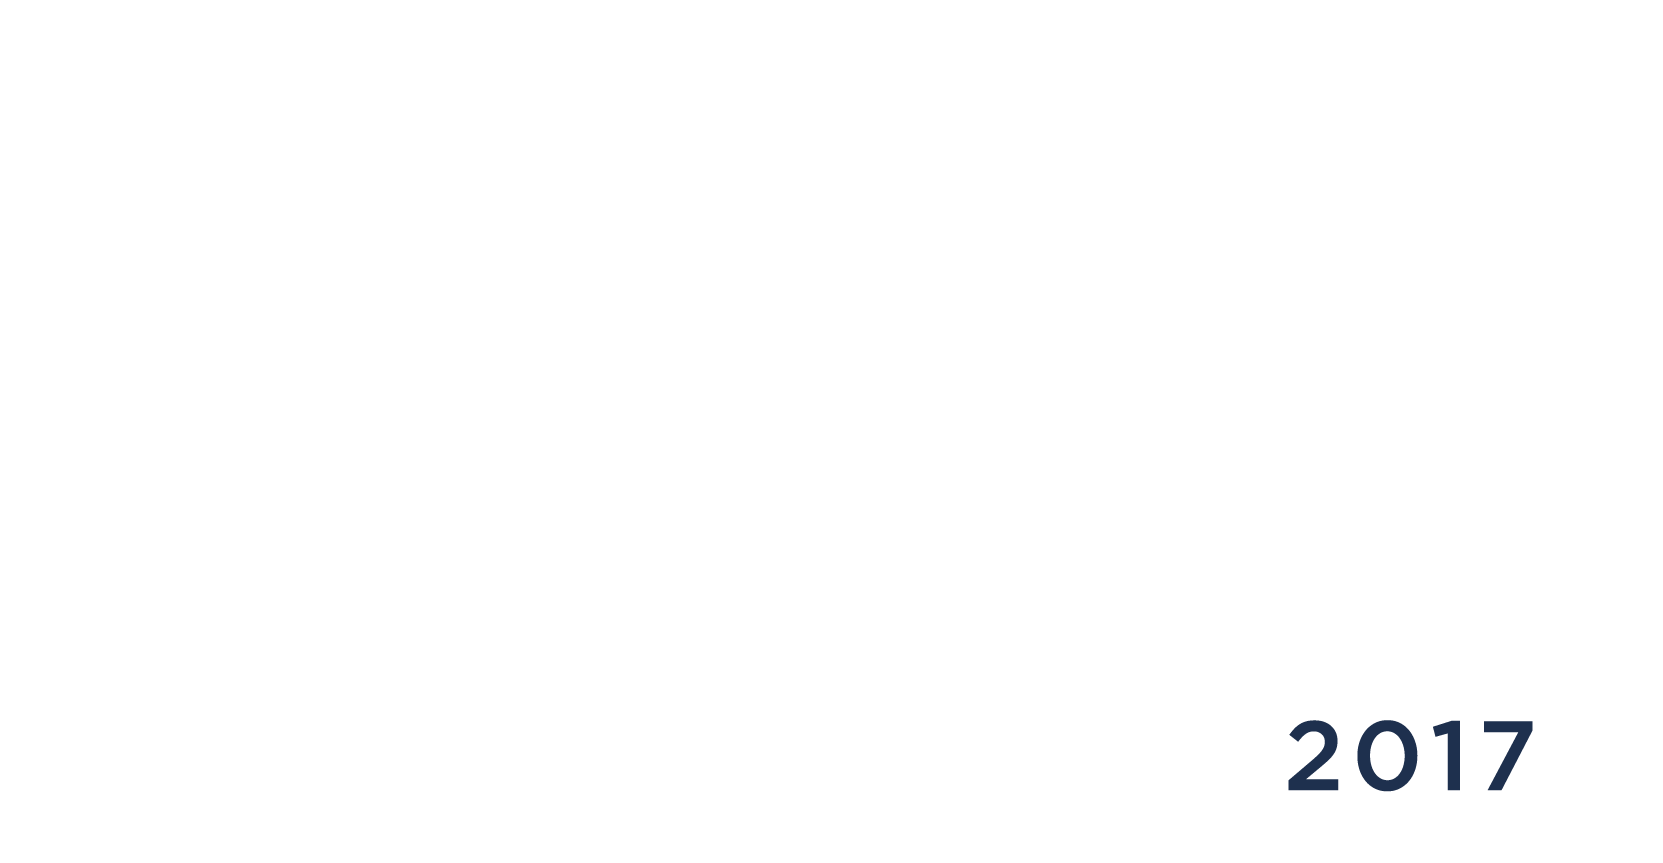 Vancouver User Experience Awards